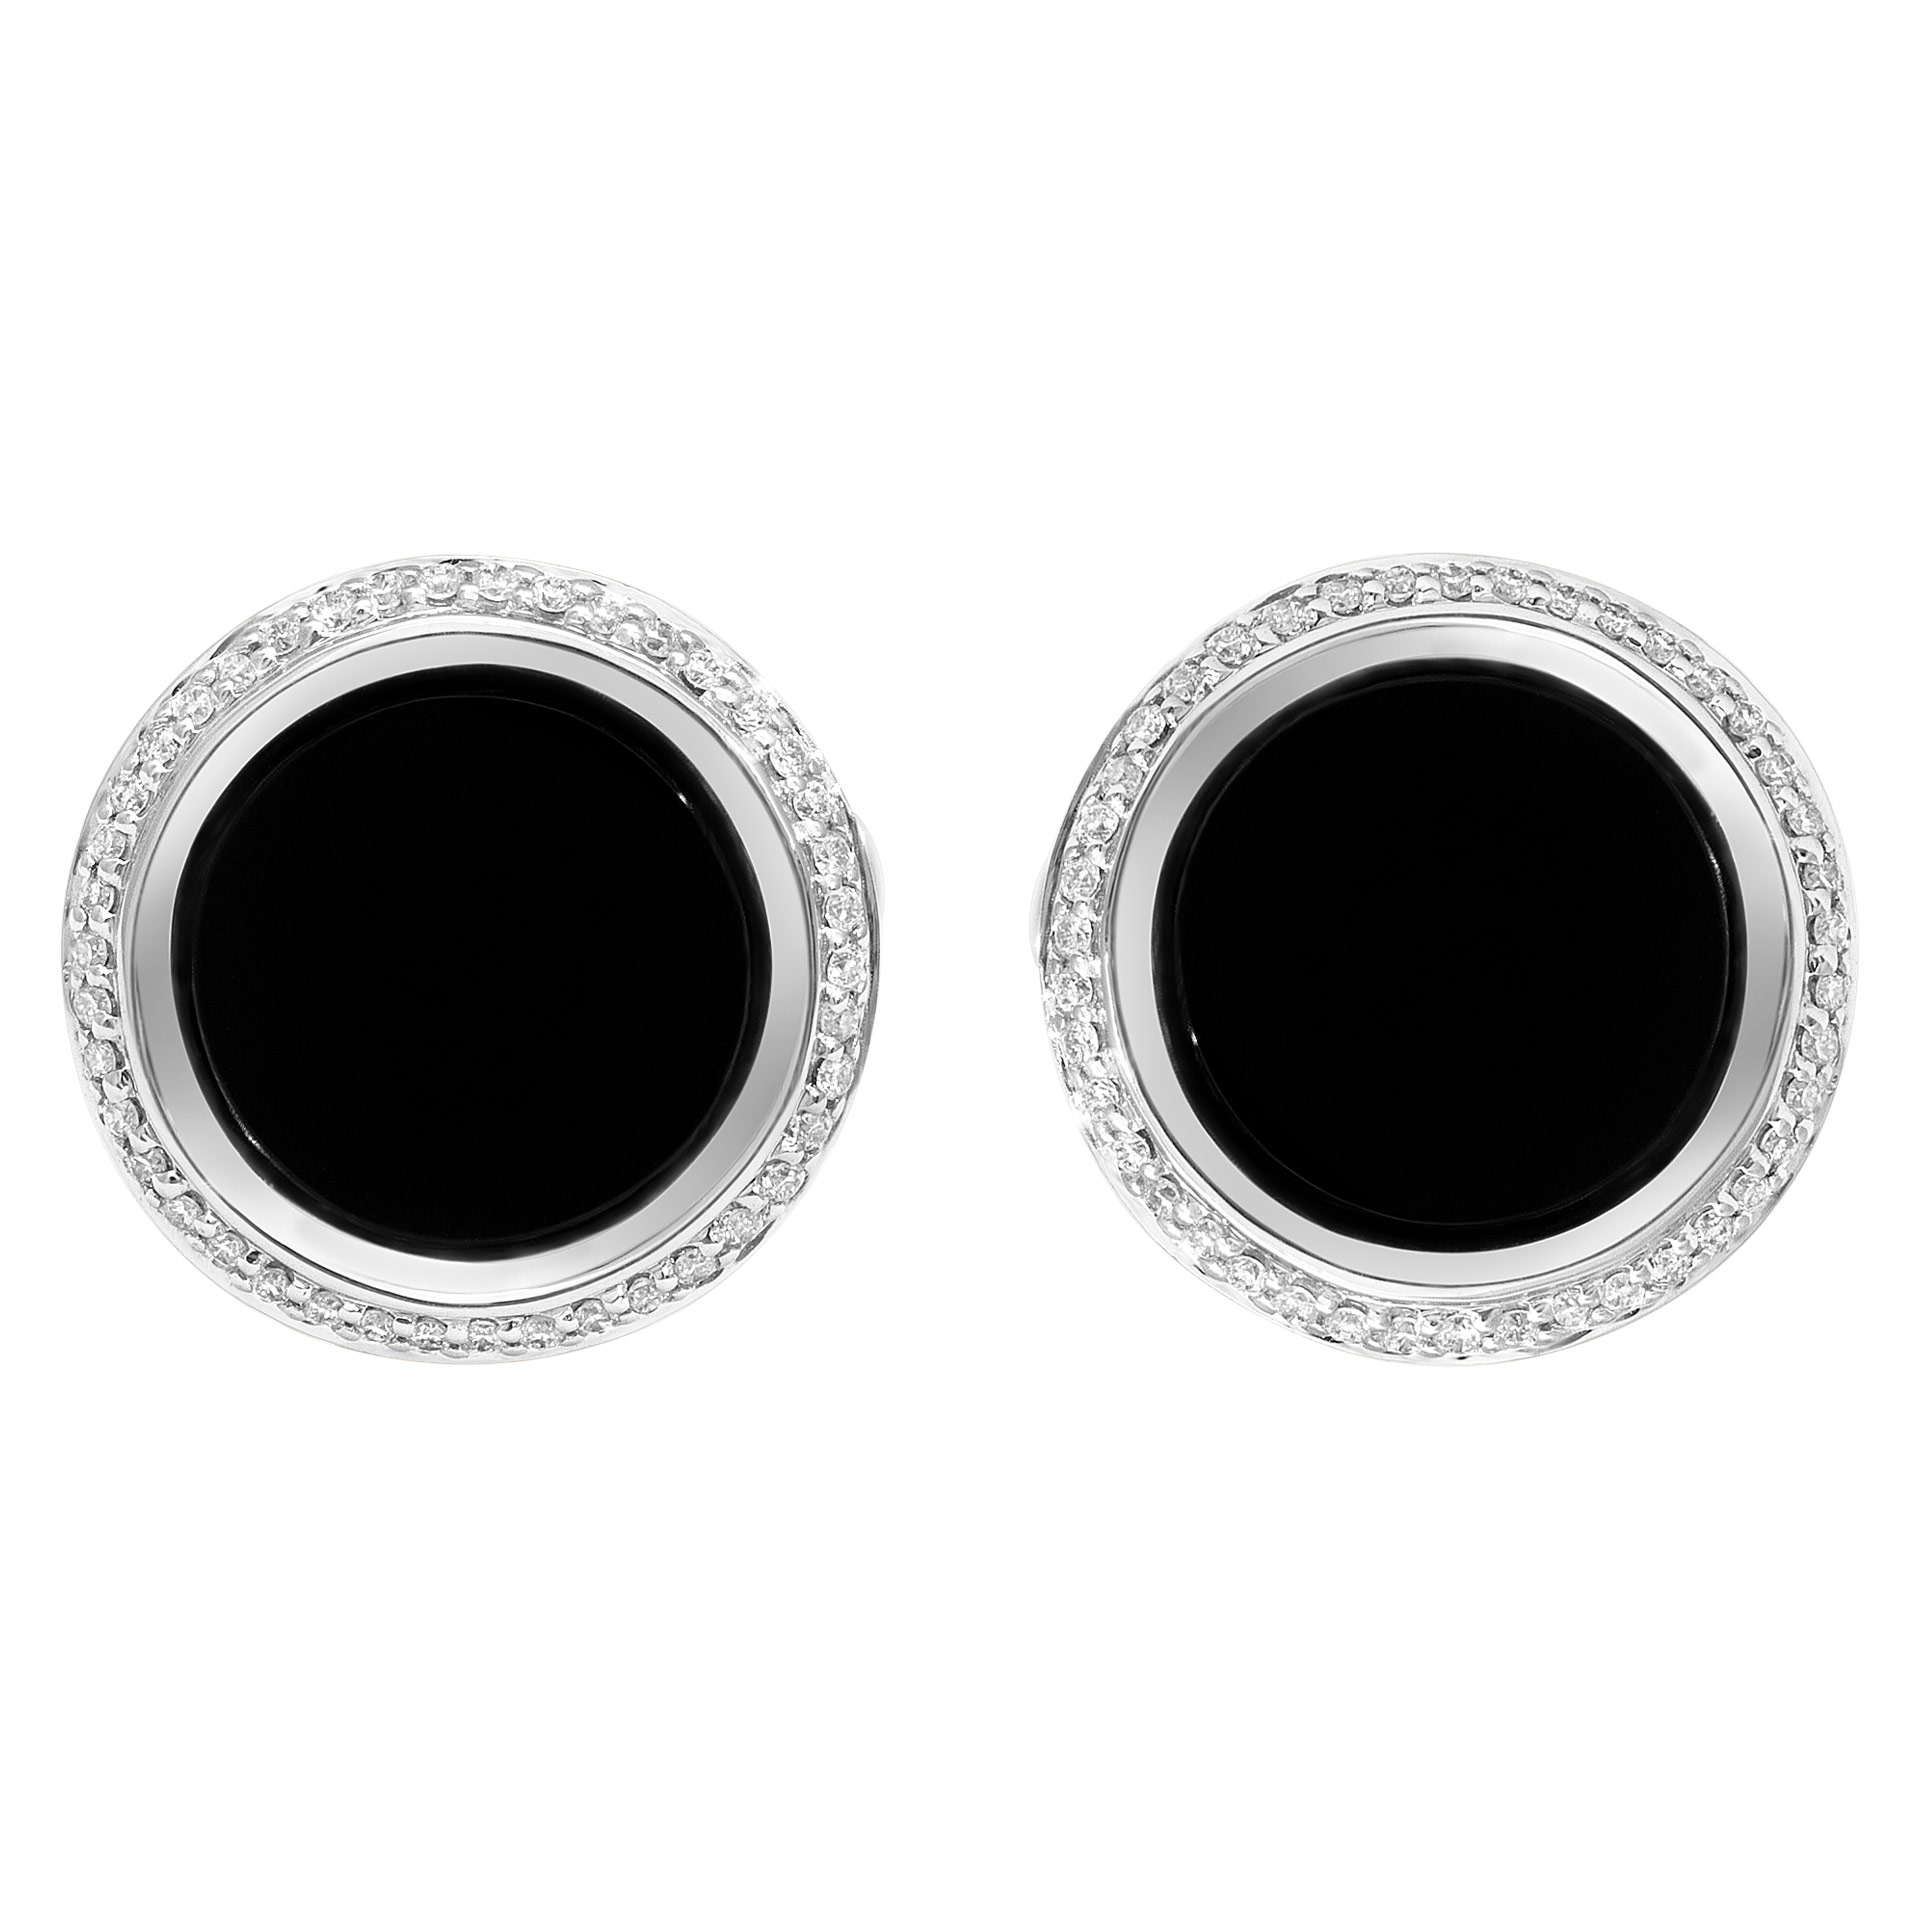 Round onyx cufflinks in 18k white gold with 0.26 carat in diamond accents